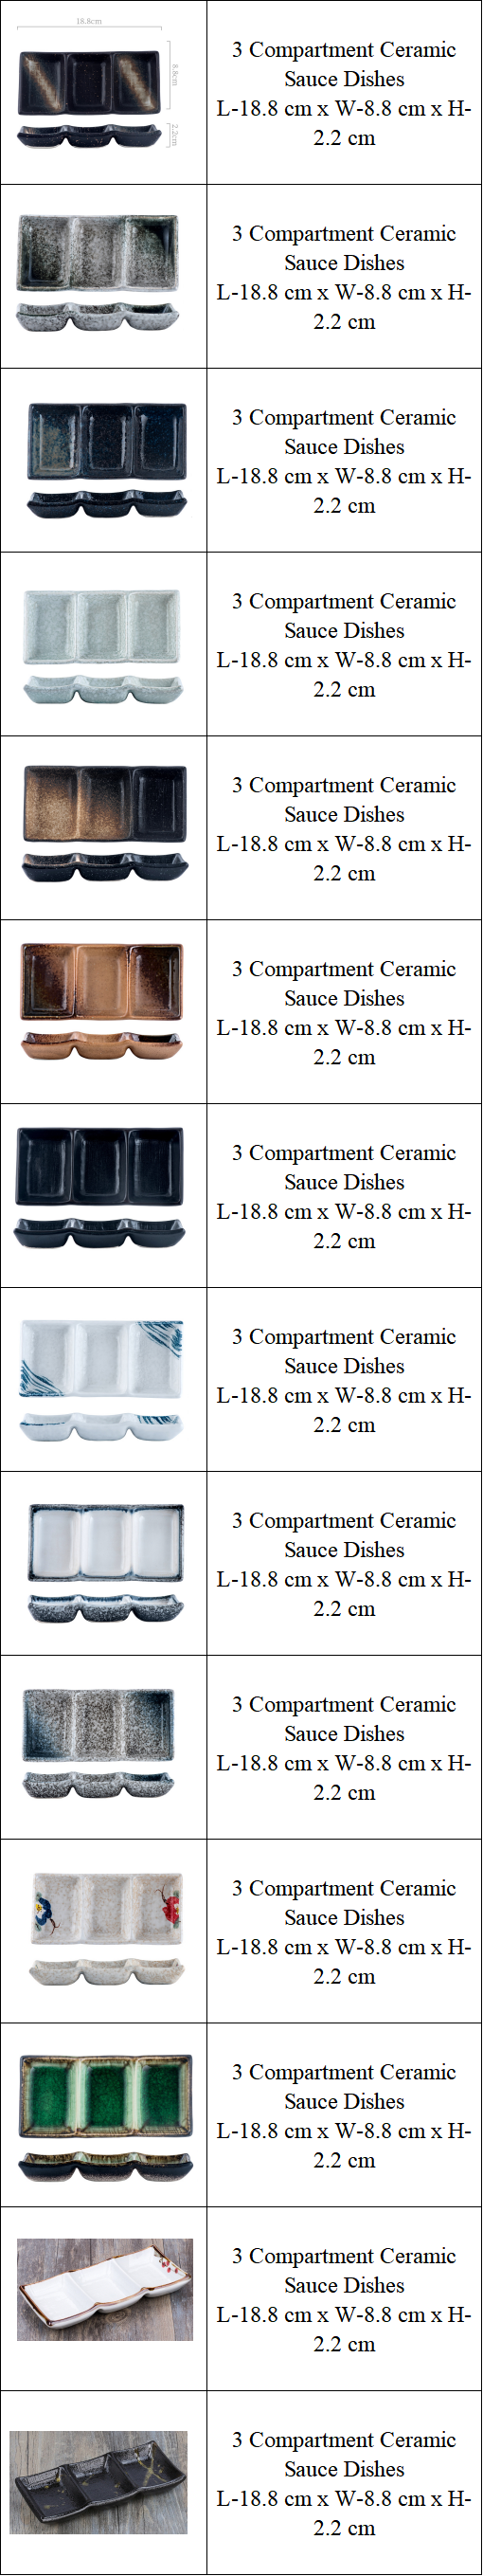 3 Compartment Ceramic Dried Fruit Dishes Plate.png